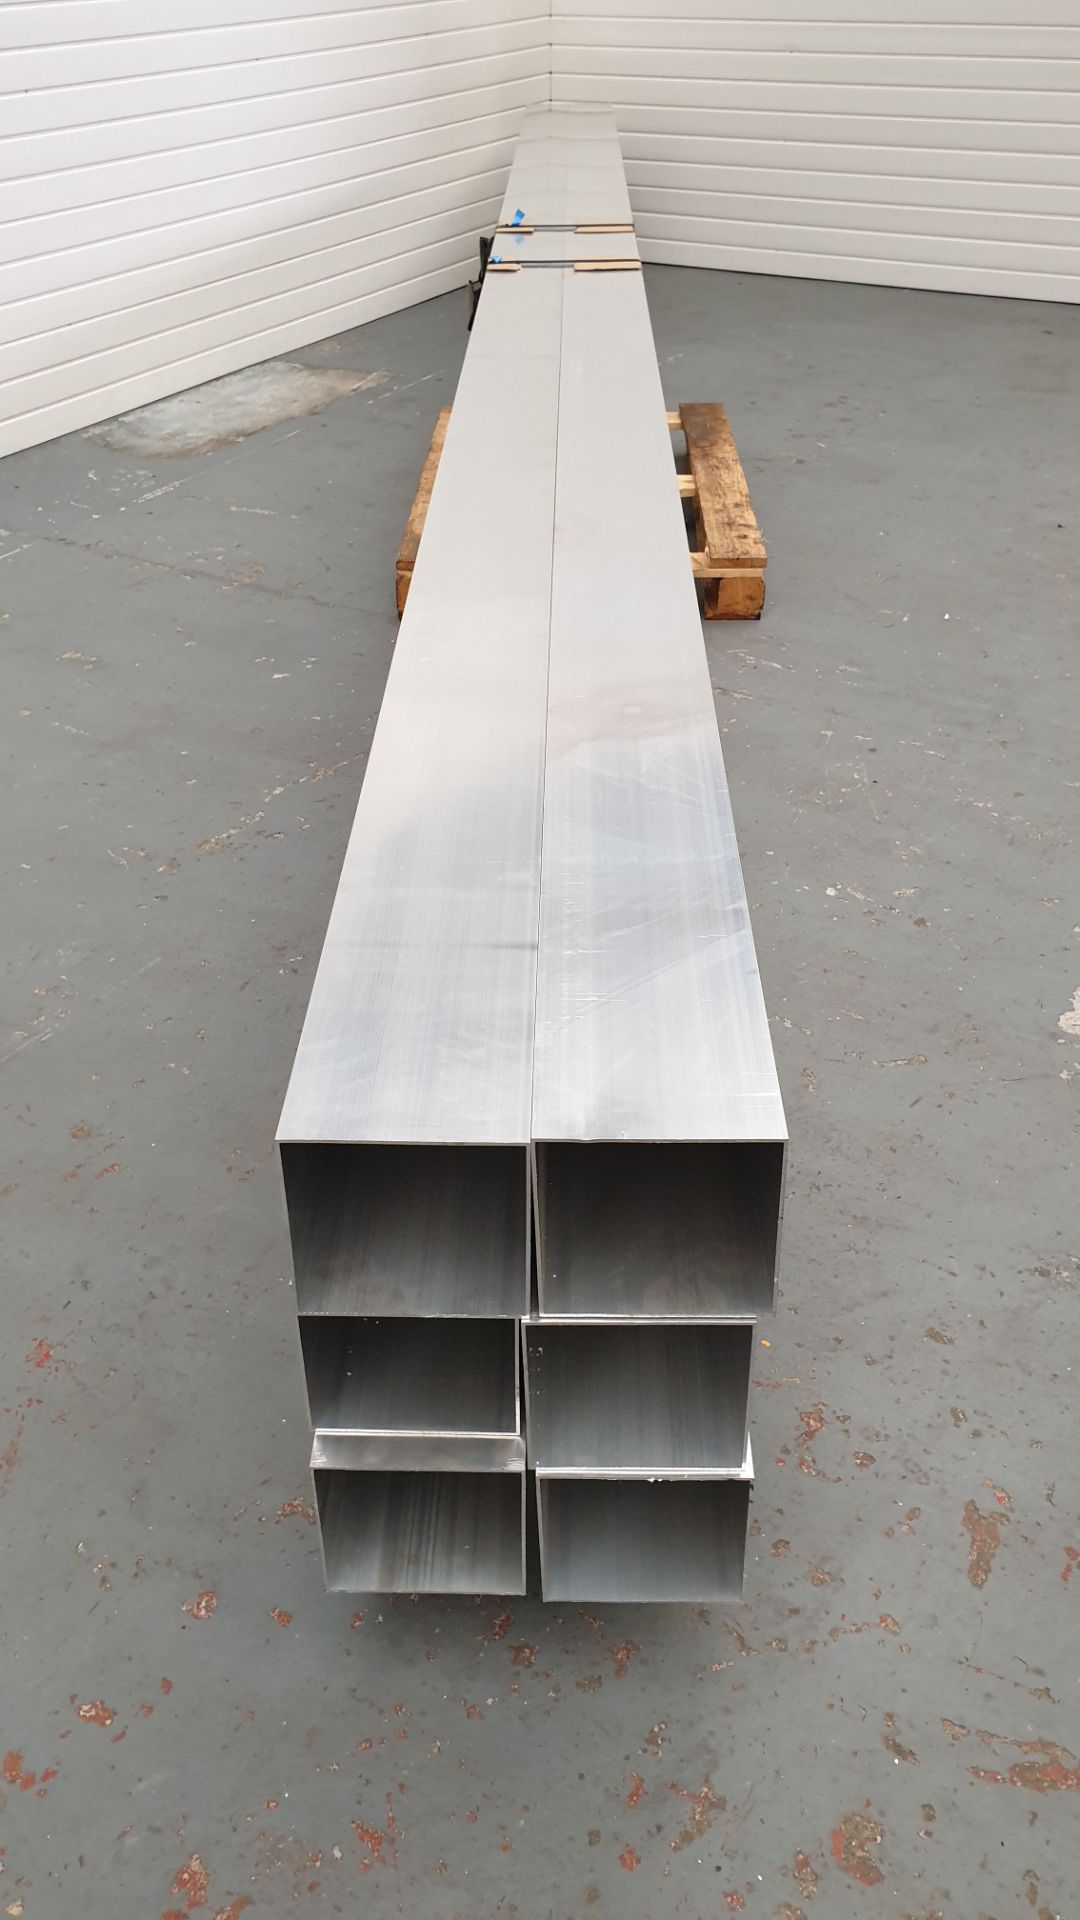 6 x Square Aluminium Hollow Section Tube Internal Size 162mm. Thickness: 3mm. Length: 6010mm.